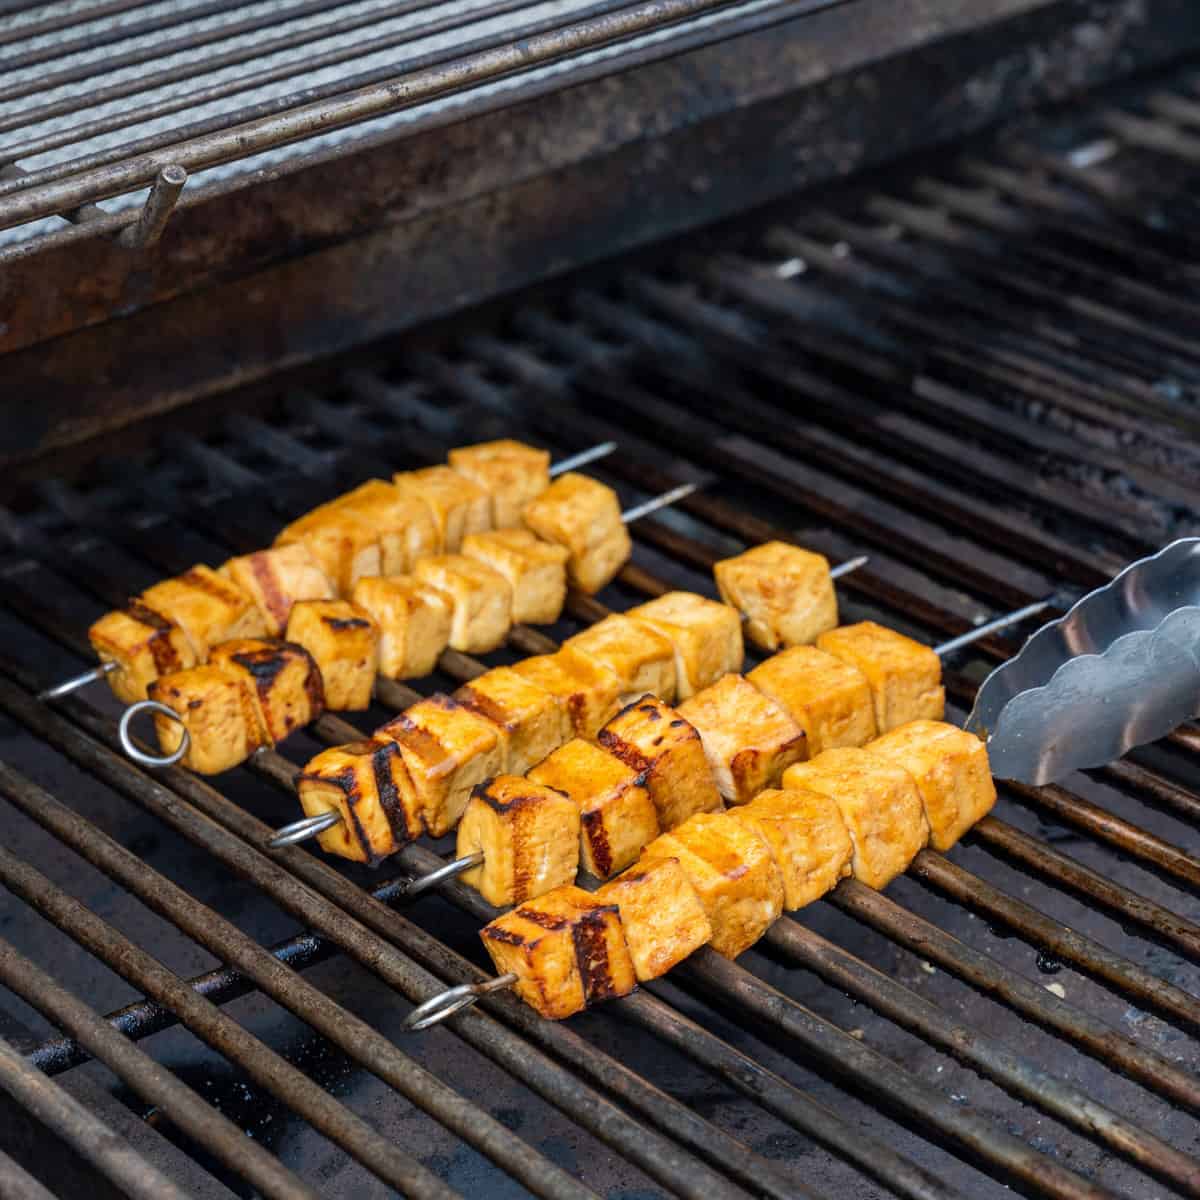 Tongs flipping marinated grilled tofu skewers on an outdoor gas grill.